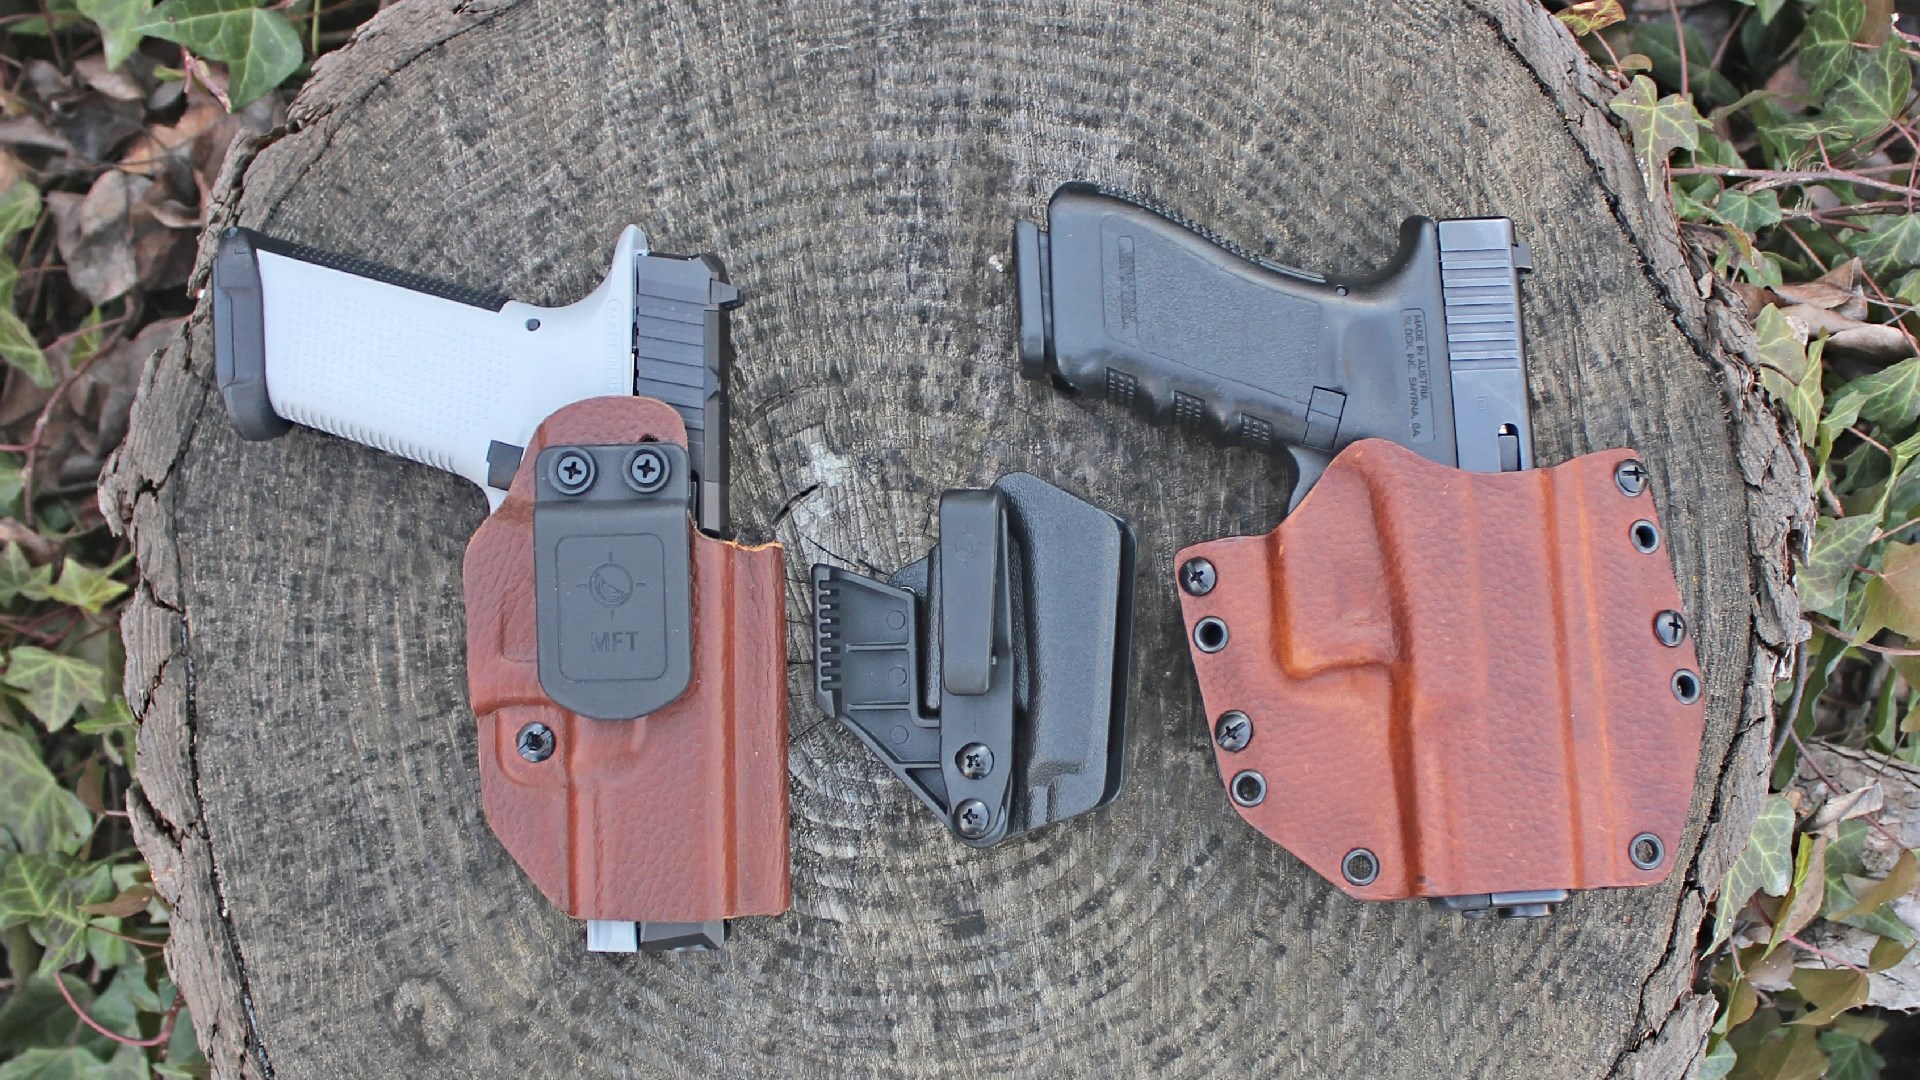 Mission First Tactical holsters and guns two pistols on log leaves outdoors